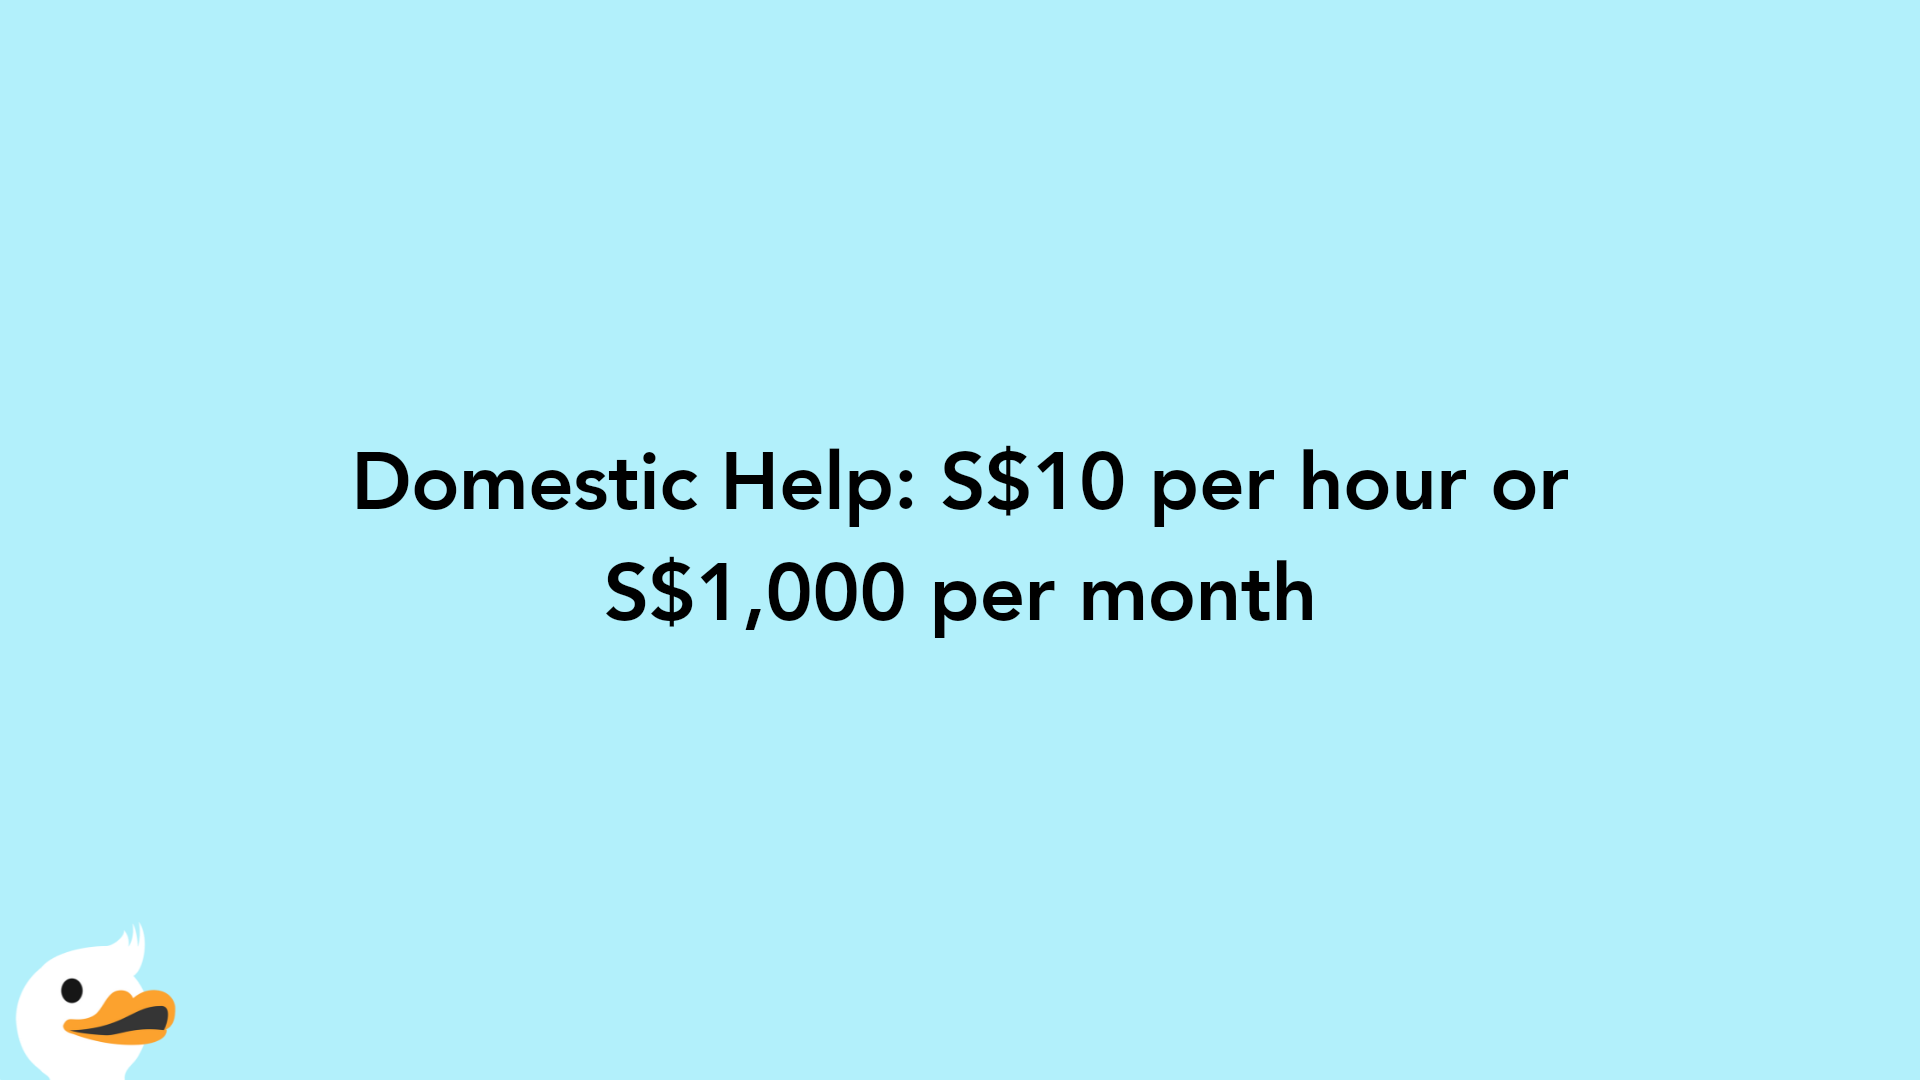 Domestic Help: S$10 per hour or S$1,000 per month